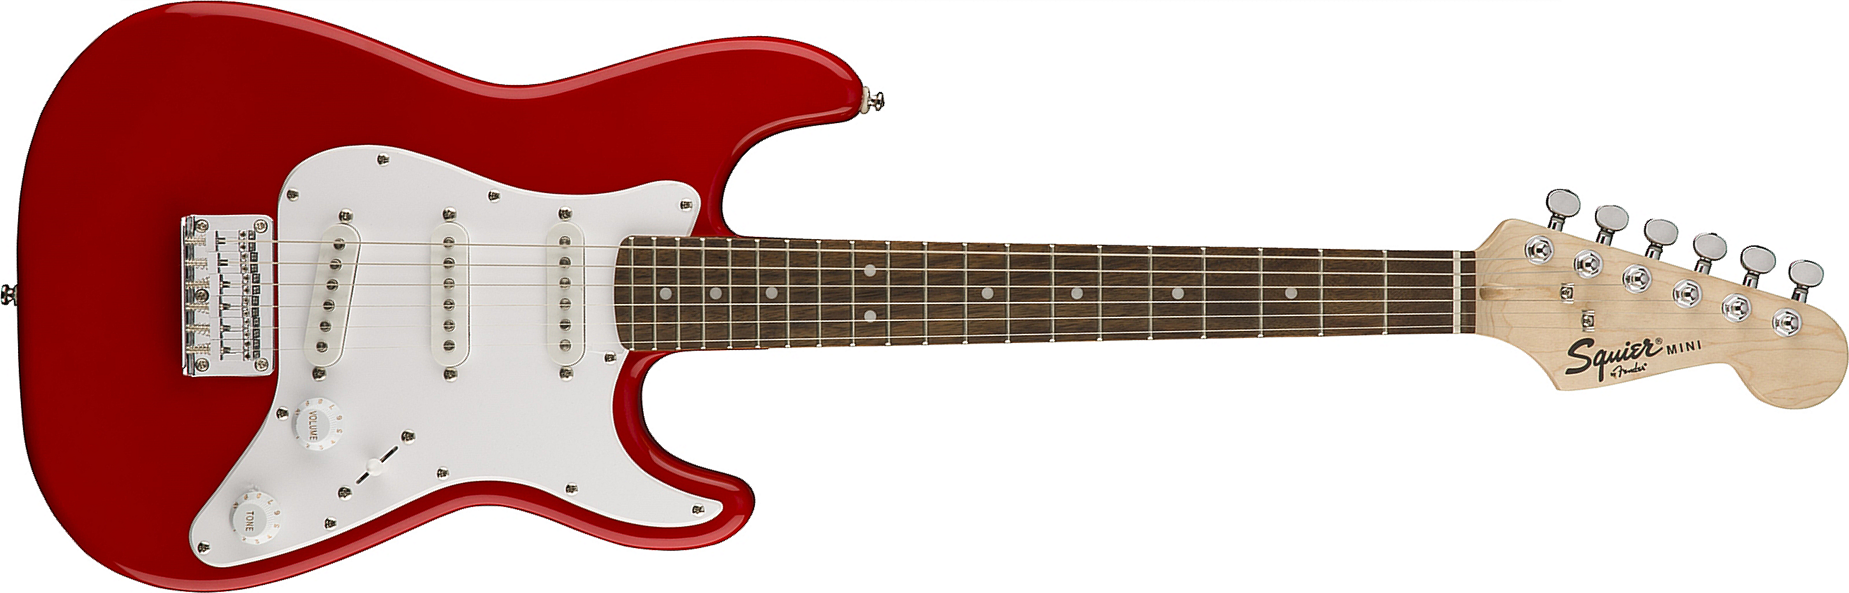 Squier Strat Mini V2 Sss Ht Rw - Torino Red - Electric guitar for kids - Main picture